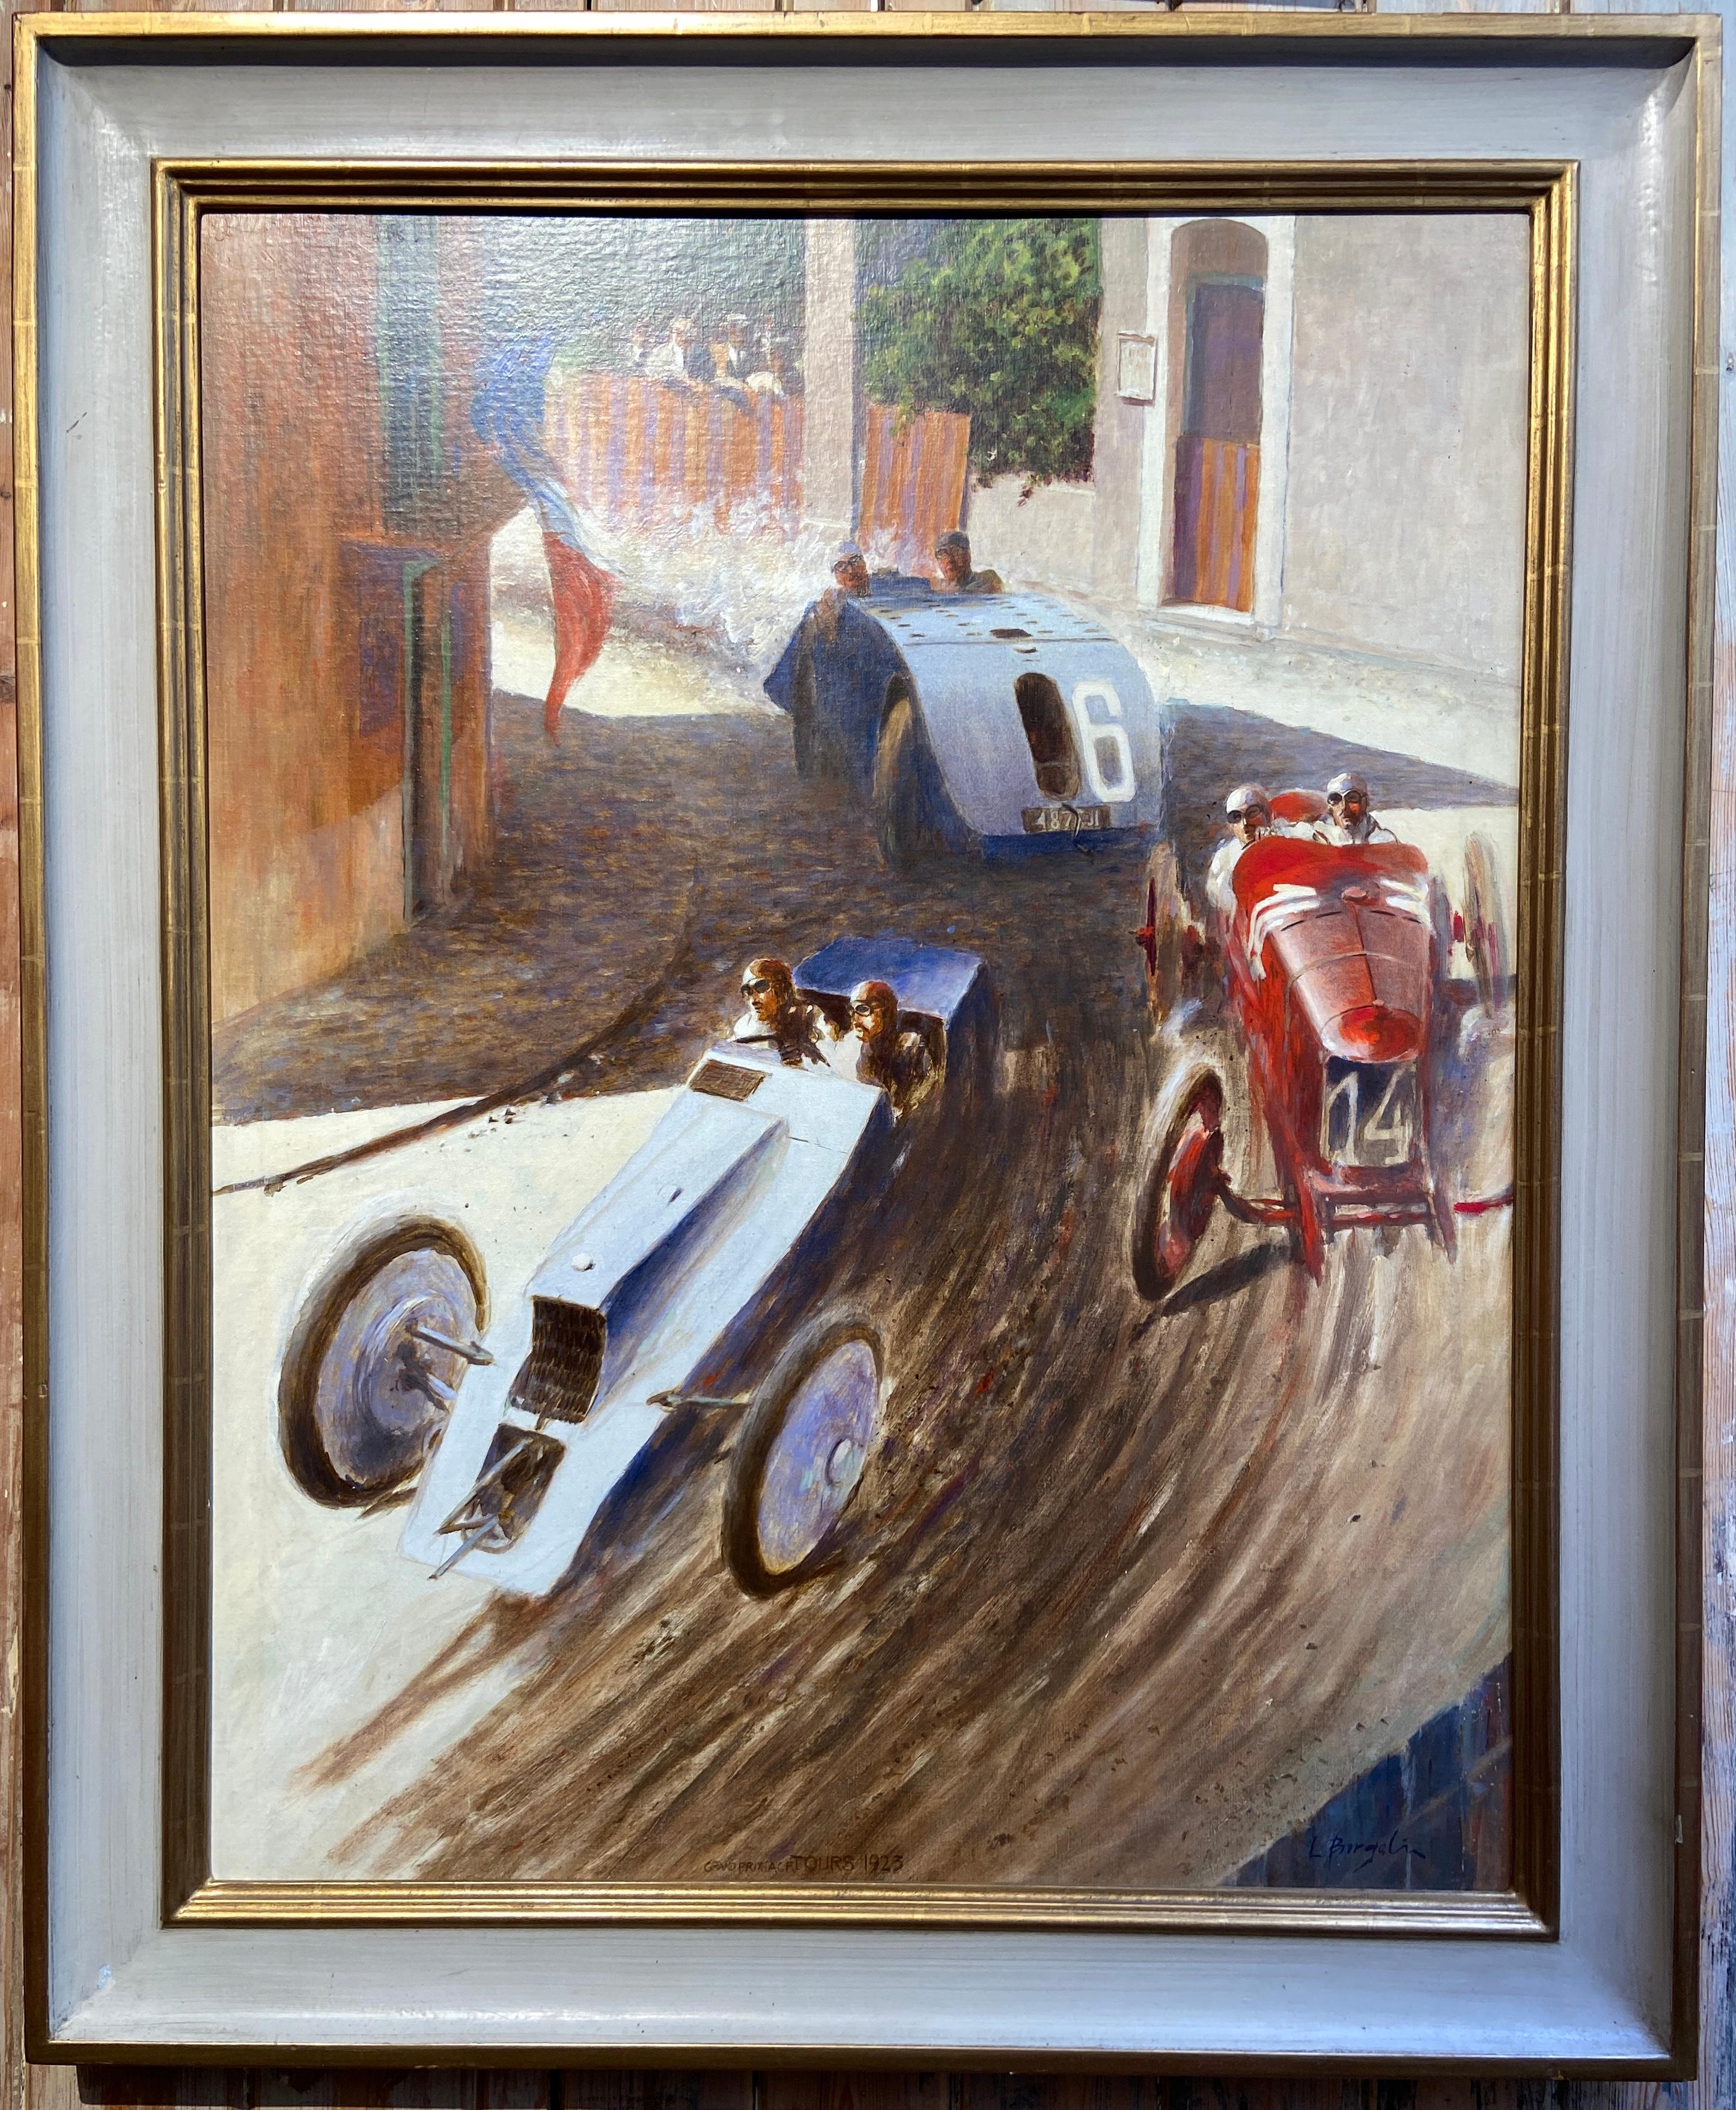 The Grand Prix Tours 1923, French Racing 20th Century Painting - Gray Landscape Painting by L. Borgelin